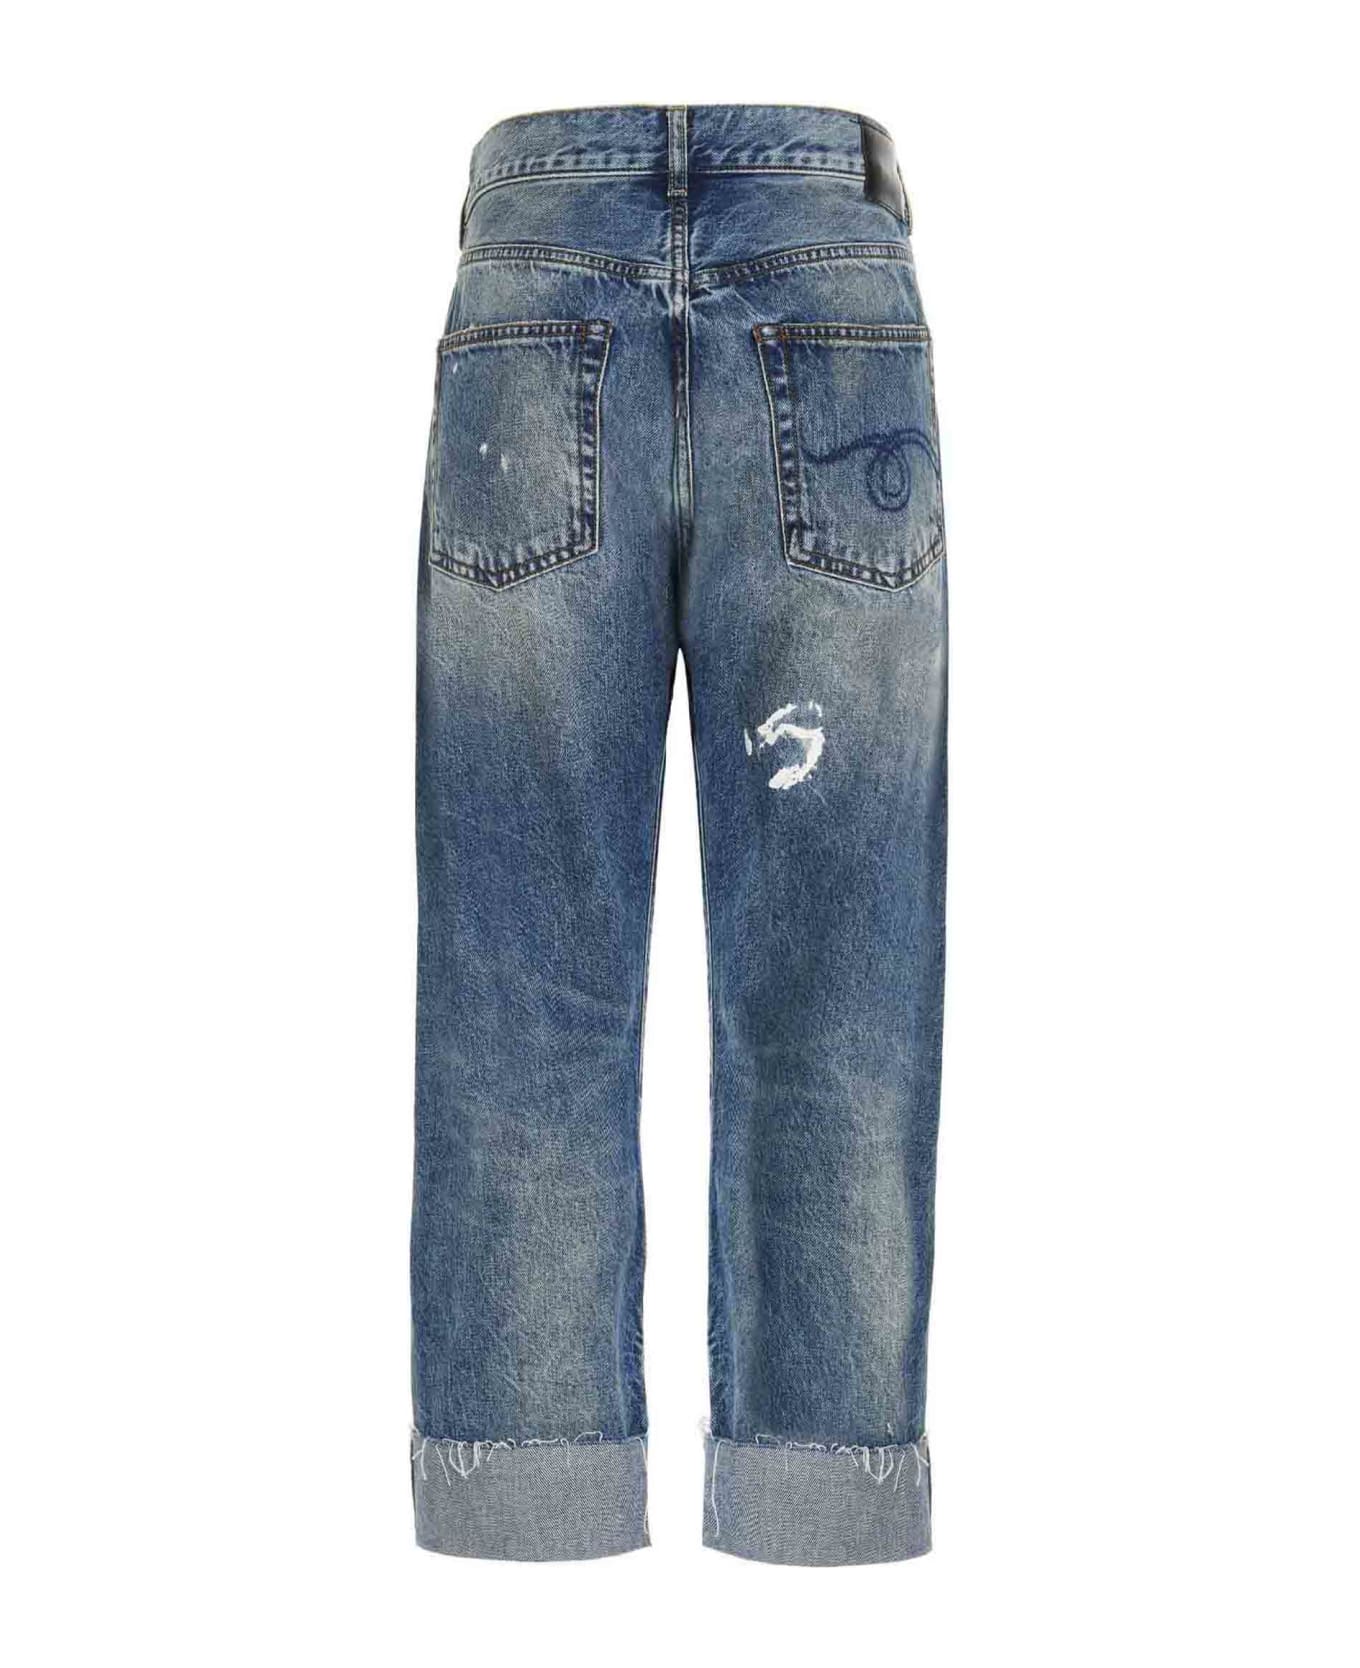 R13 Jeans 'cross Over' - Blue